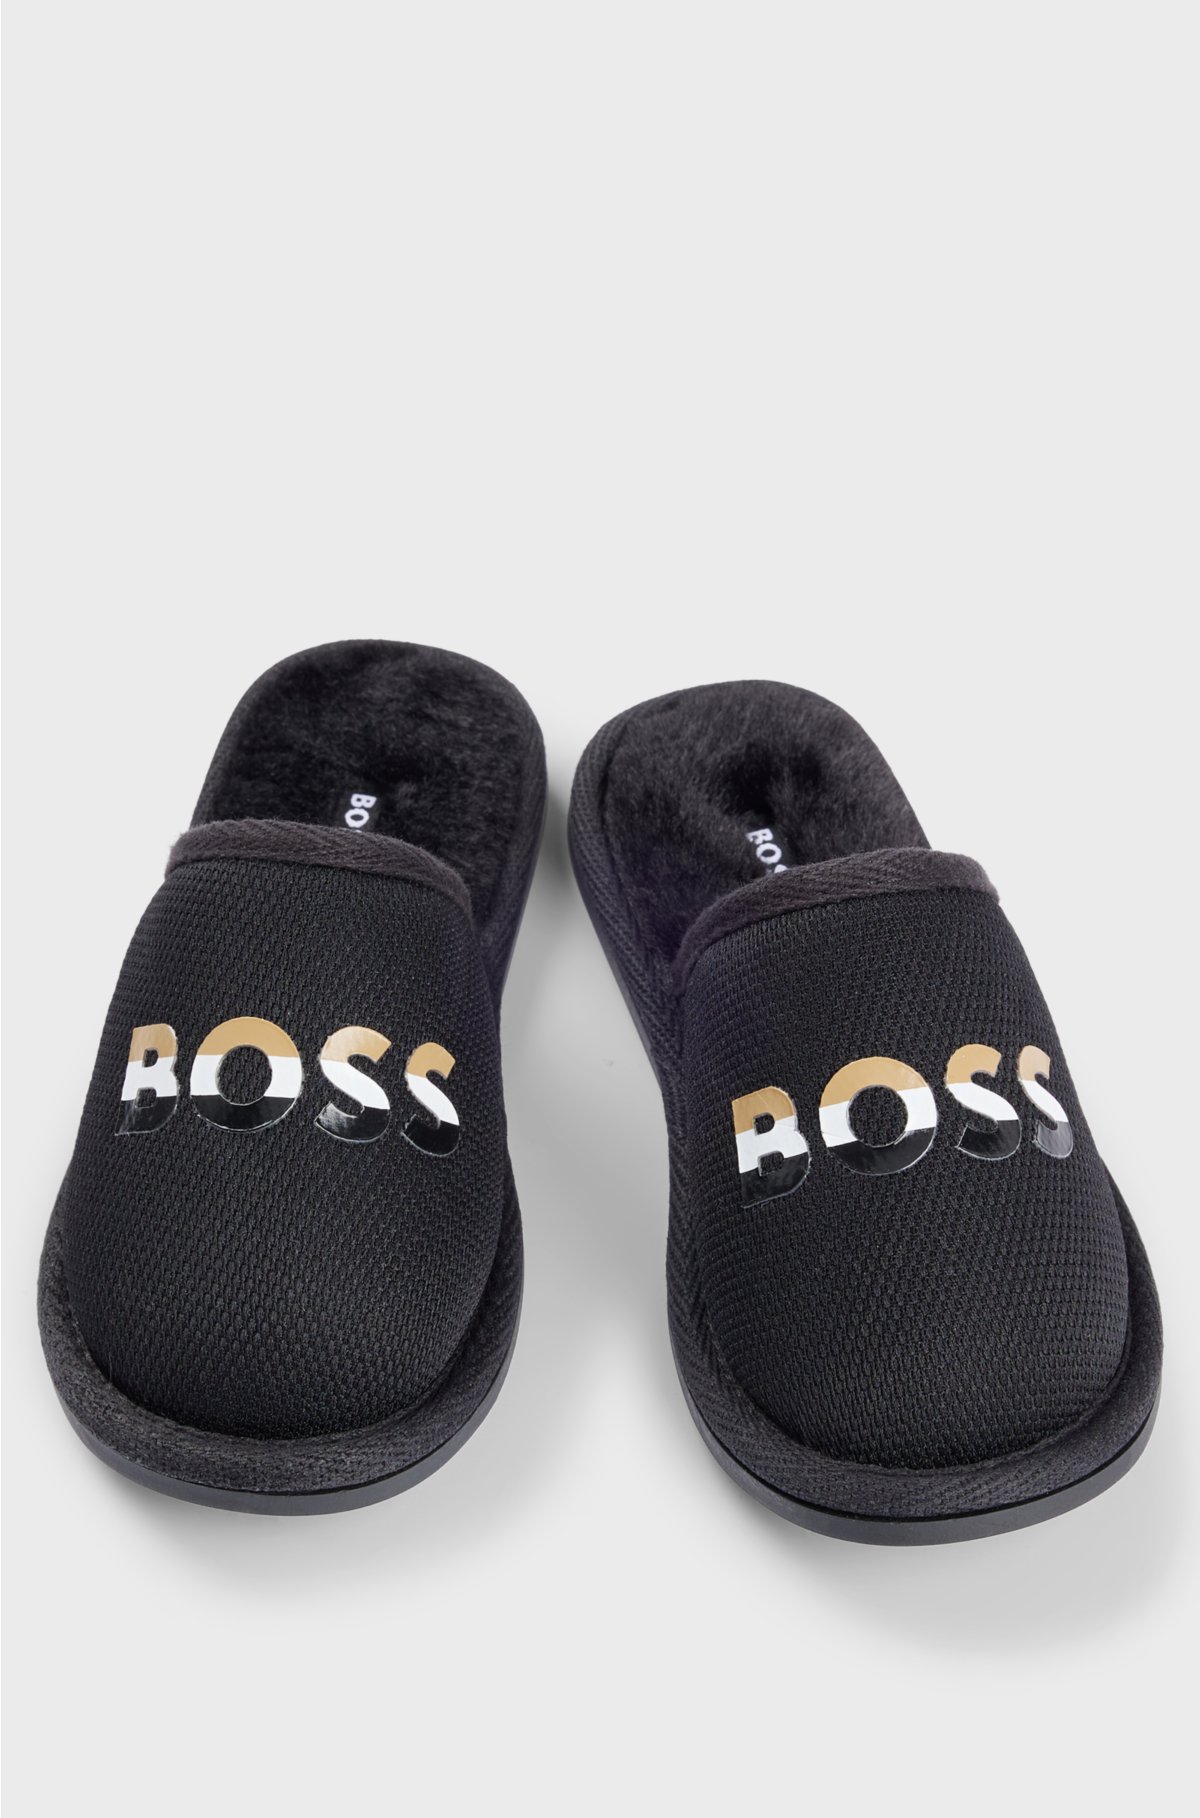 Kids' logo slippers with faux-fur lining, Black